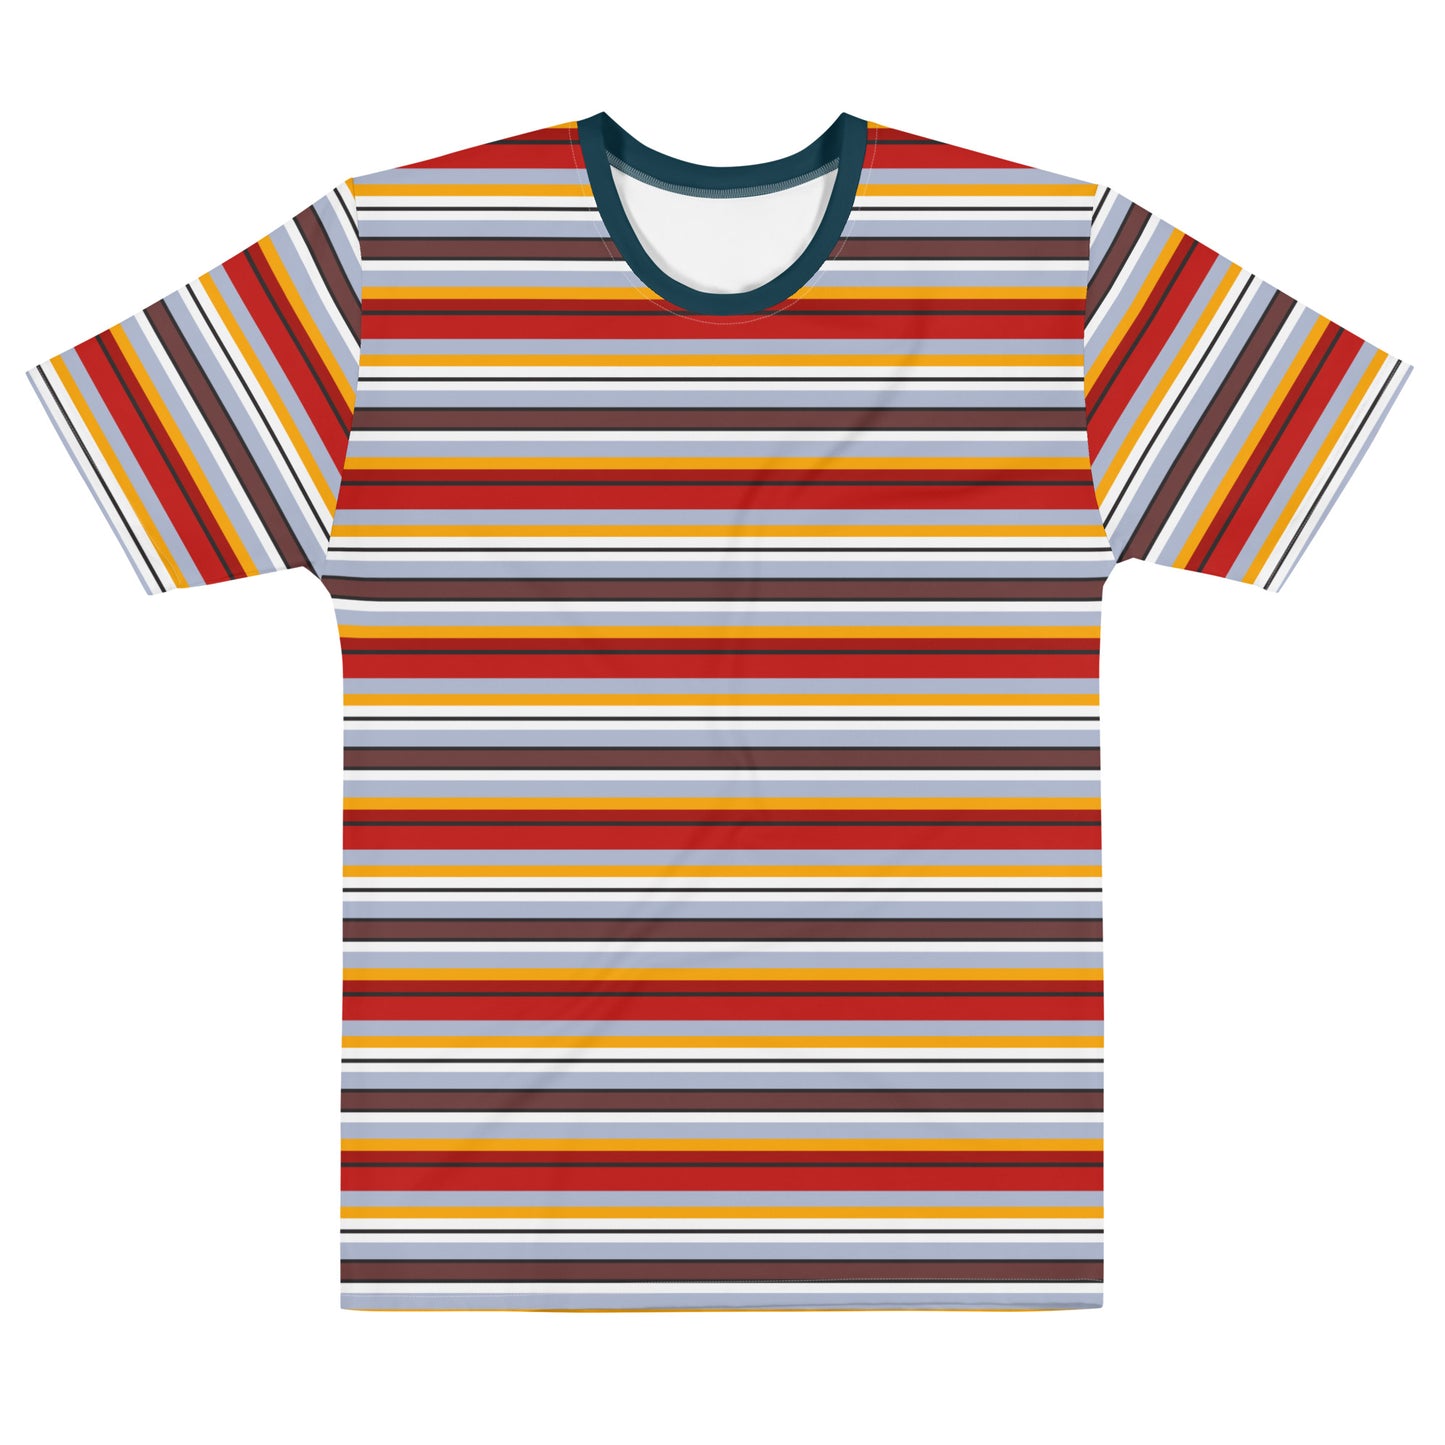 Multi Colored Lines - Inspired By Taylor Swift - Sustainably Made Men’s Short Sleeve Tee